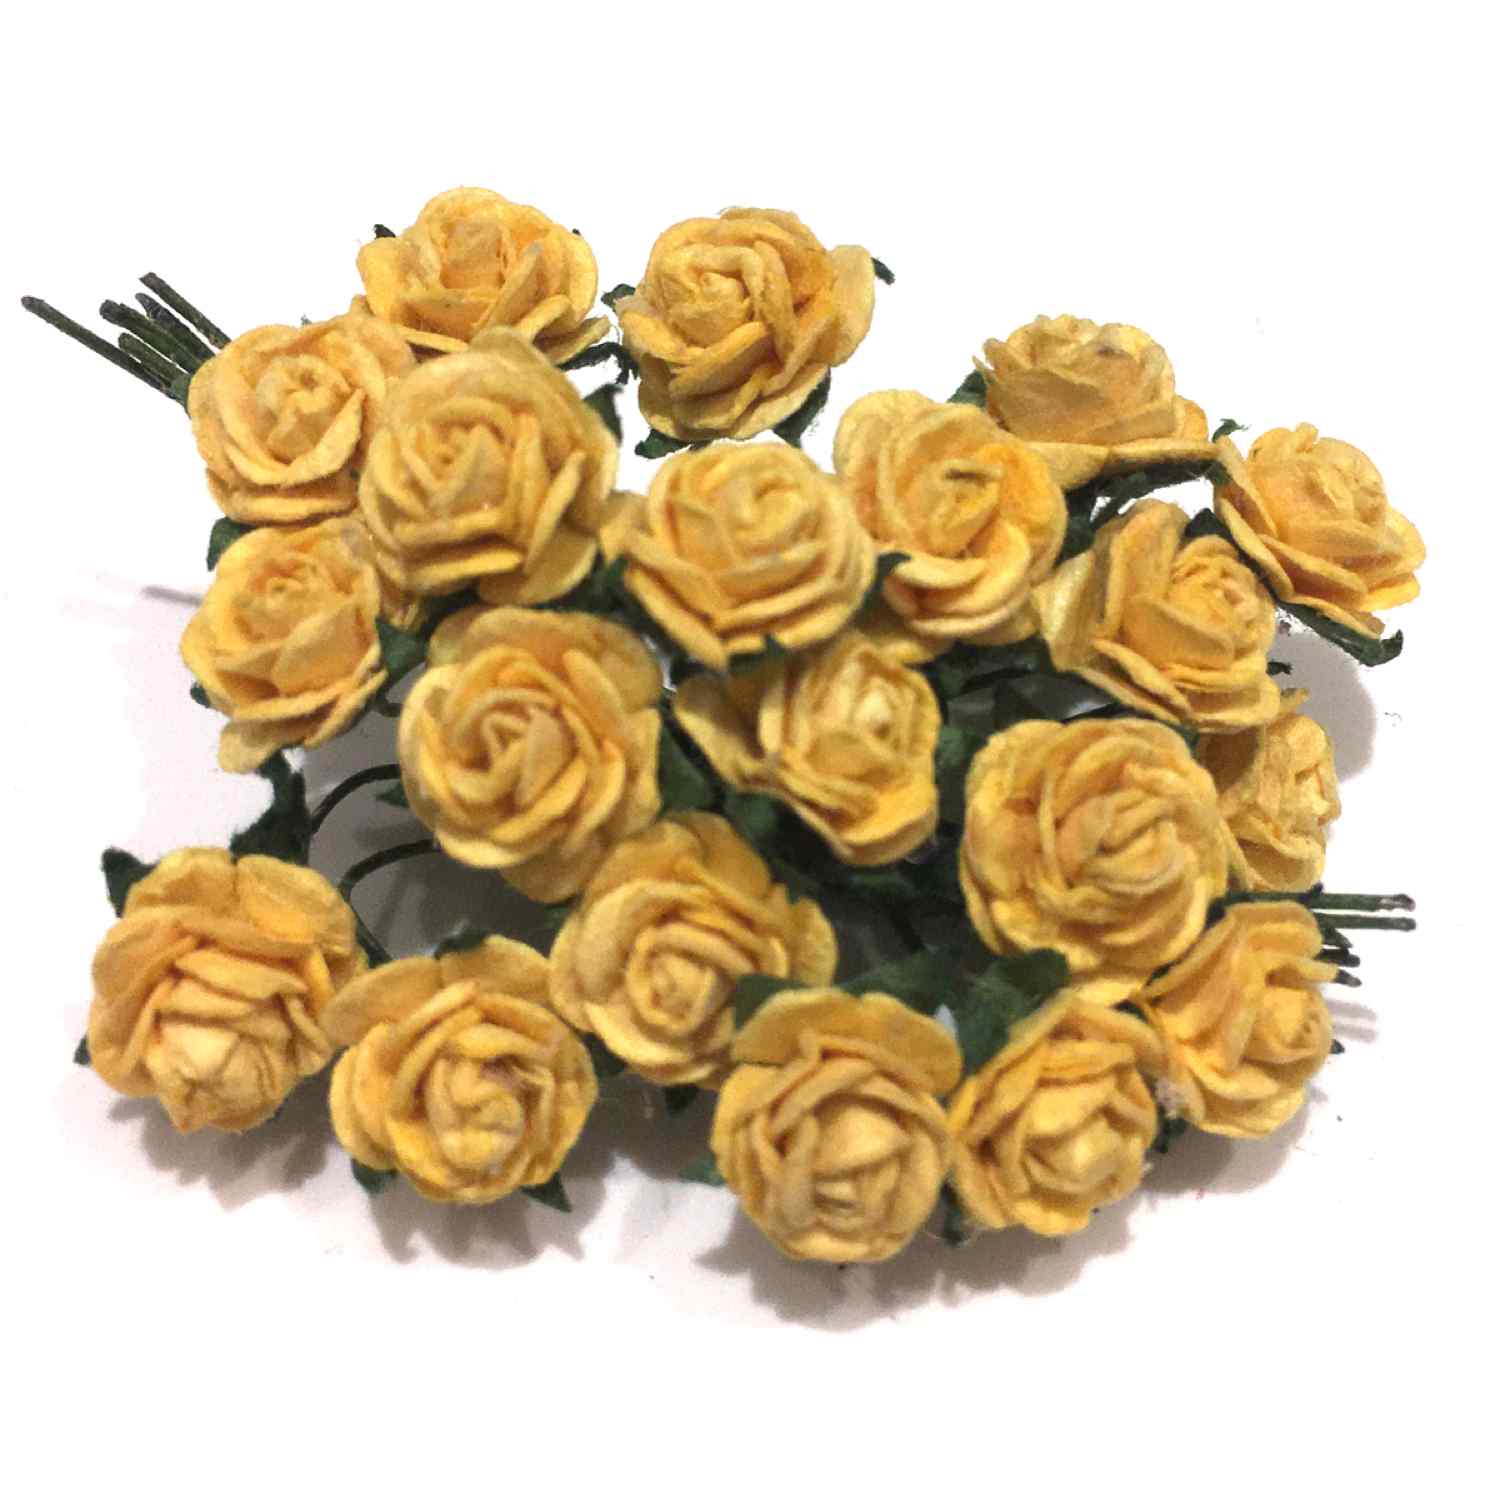 Mustard Open Mulberry Paper Roses Or006